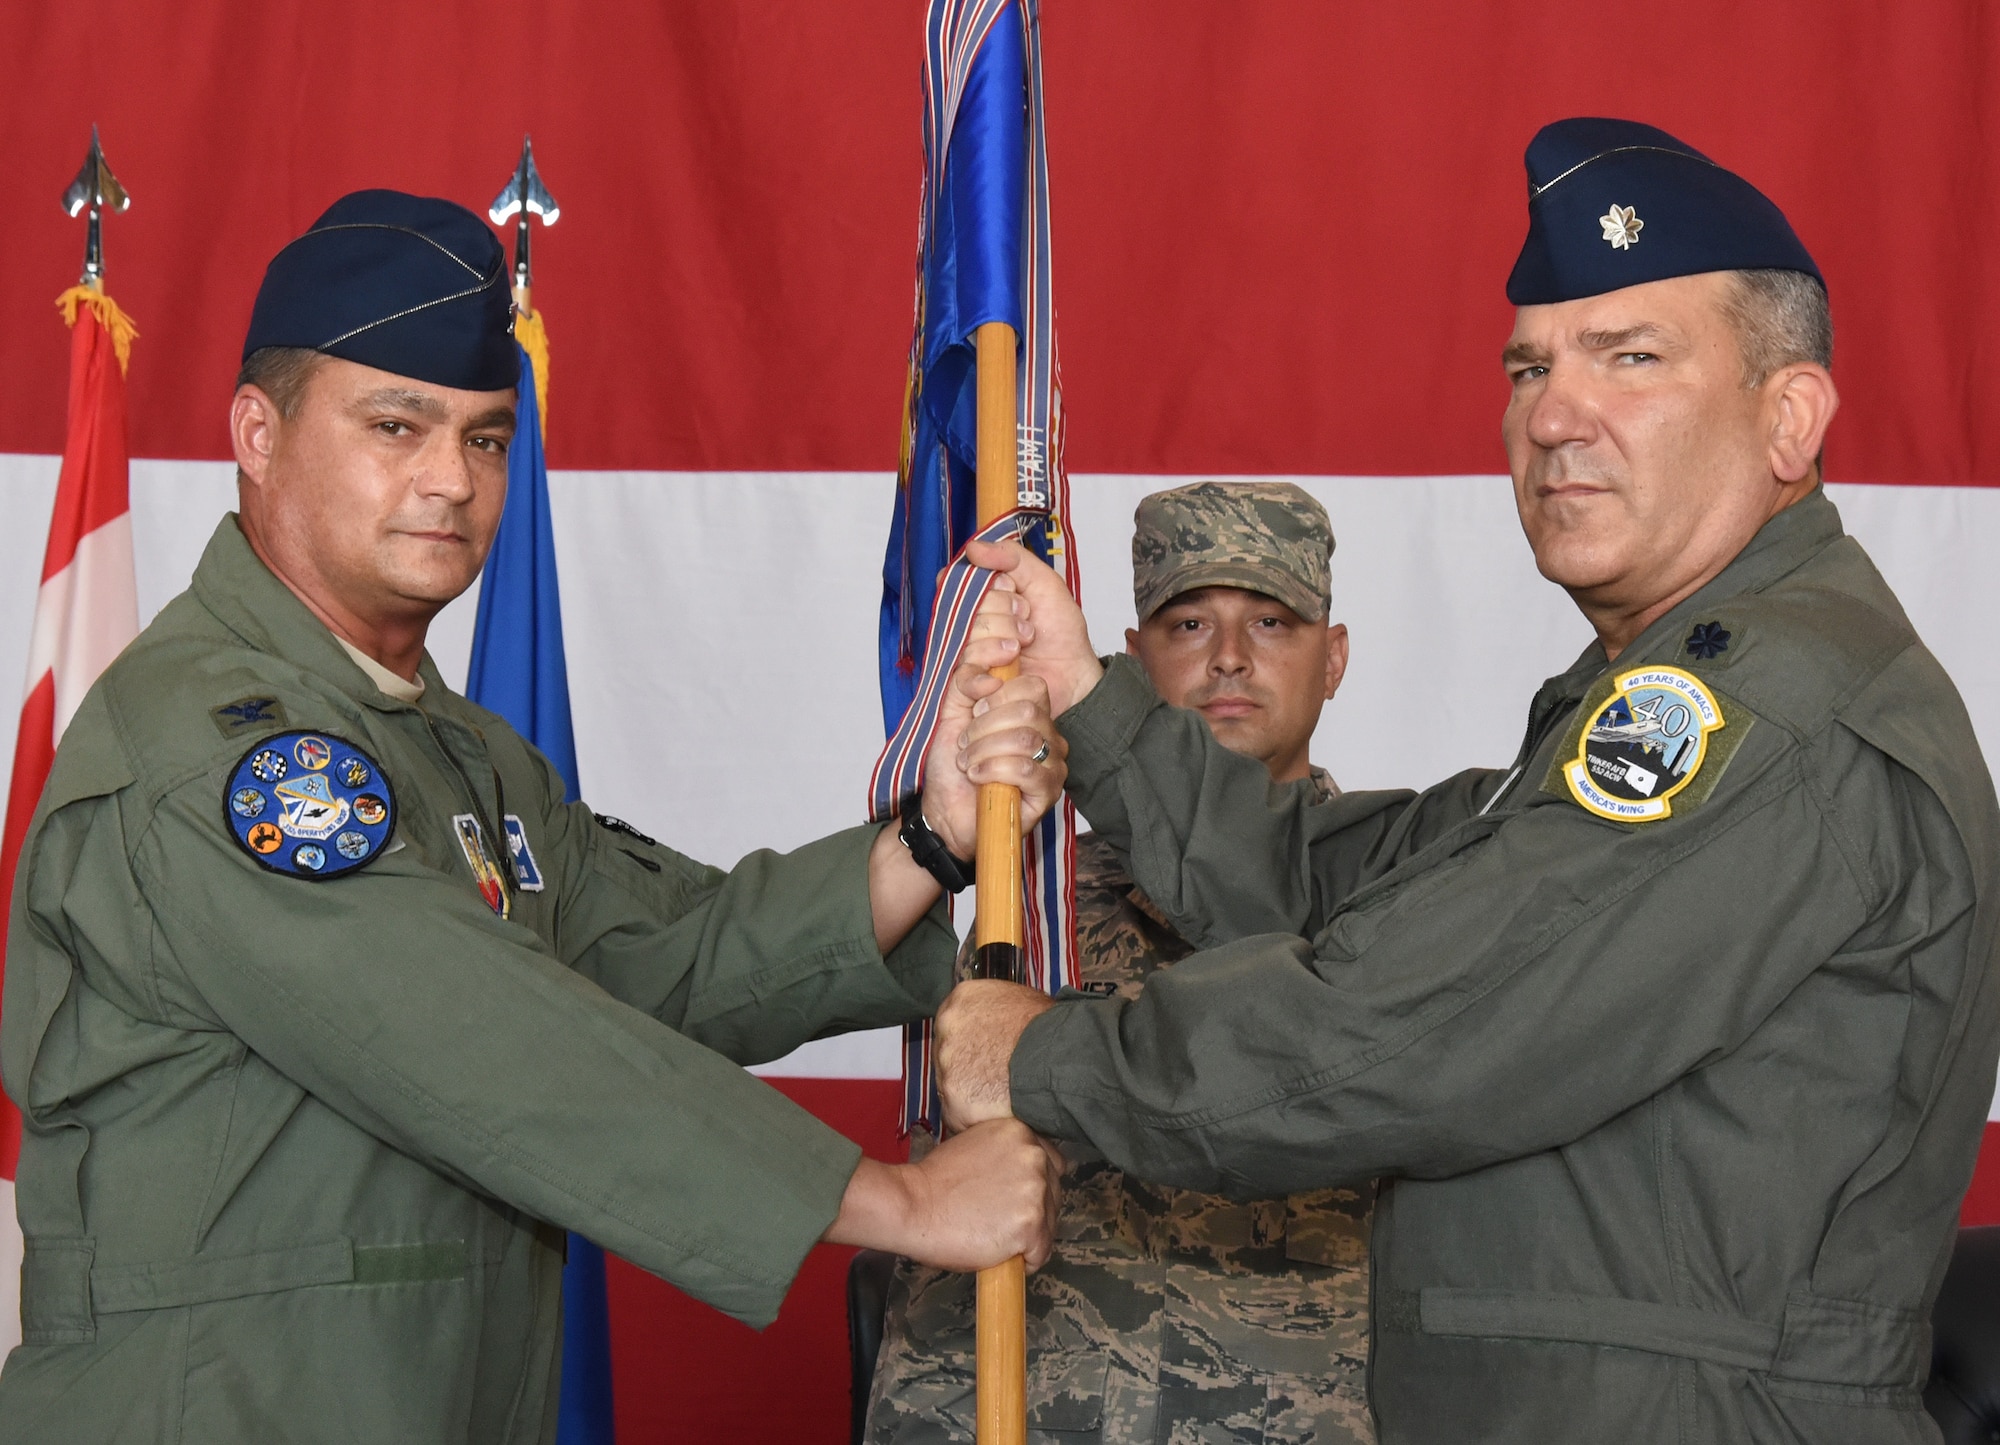 Lt. Col. Kirk Hansen, right, incoming commander of the 552nd Training Squadron accepts the unit guidon from Col. Richard Land III, 552nd Operations Group commander, during a change of command ceremony July 12, in Dock 2 of Hangar 230. Waiting to receive the guidon is Master Sgt. Antonio Quinonez, 552nd TRS first sergeant.